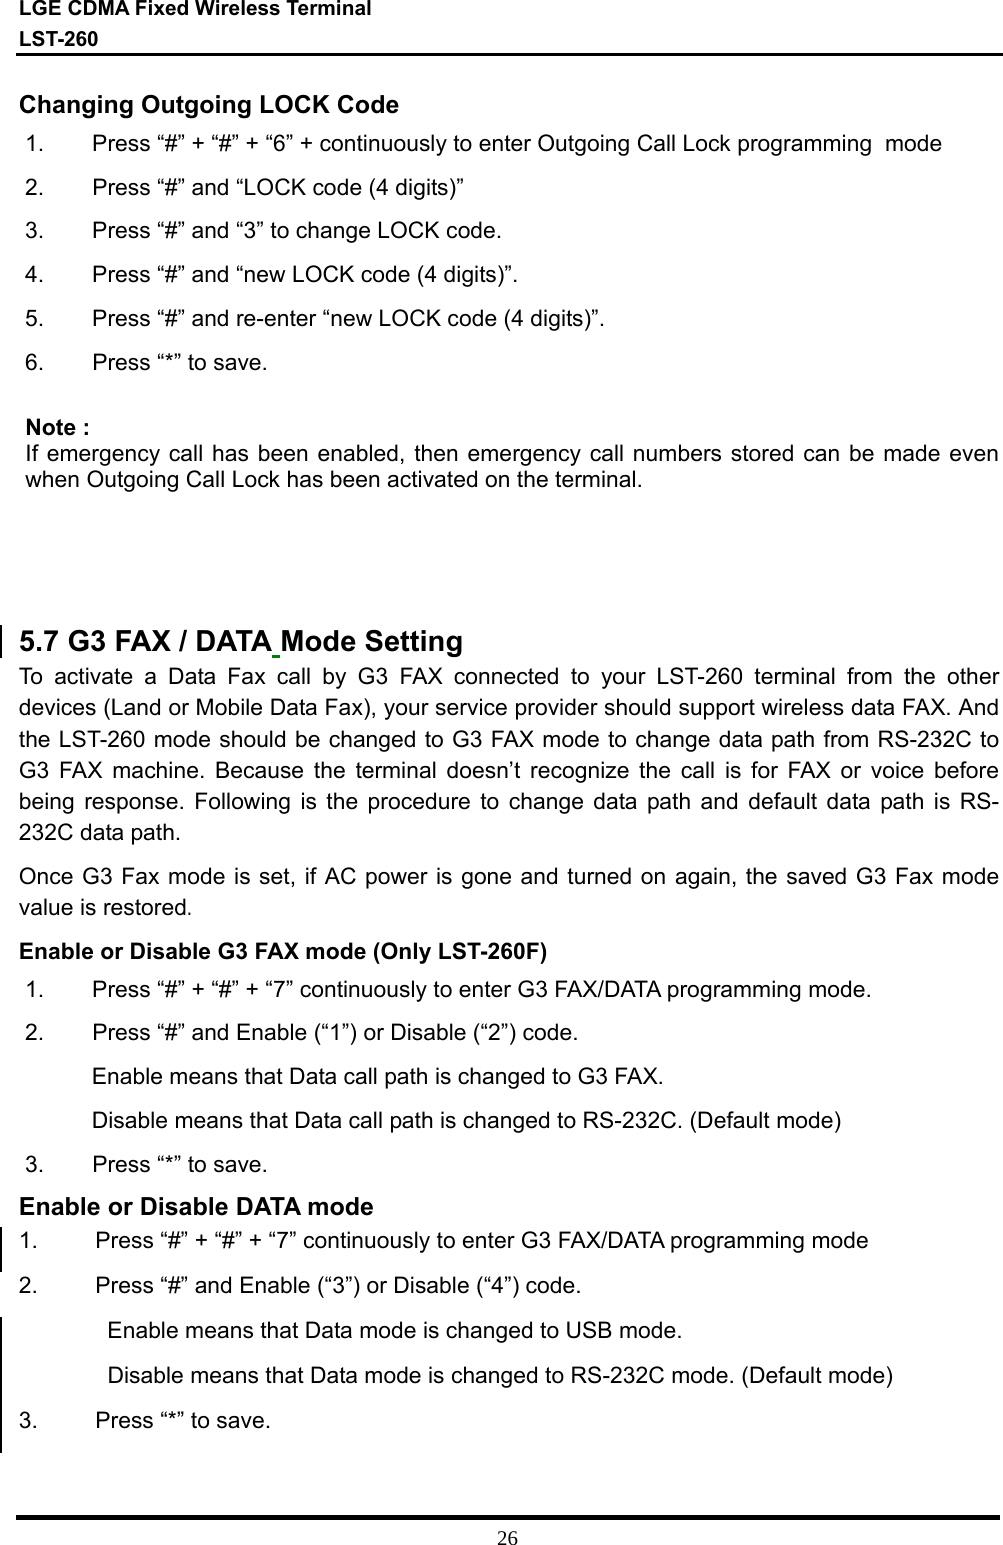 LGE CDMA Fixed Wireless Terminal LST-260         26 Changing Outgoing LOCK Code  1.  Press “#” + “#” + “6” + continuously to enter Outgoing Call Lock programming  mode 2.  Press “#” and “LOCK code (4 digits)” 3.  Press “#” and “3” to change LOCK code. 4.  Press “#” and “new LOCK code (4 digits)”. 5.  Press “#” and re-enter “new LOCK code (4 digits)”. 6.  Press “*” to save.  Note : If emergency call has been enabled, then emergency call numbers stored can be made even when Outgoing Call Lock has been activated on the terminal.      5.7 G3 FAX / DATA Mode Setting  To activate a Data Fax call by G3 FAX connected to your LST-260 terminal from the other devices (Land or Mobile Data Fax), your service provider should support wireless data FAX. And the LST-260 mode should be changed to G3 FAX mode to change data path from RS-232C to G3 FAX machine. Because the terminal doesn’t recognize the call is for FAX or voice before being response. Following is the procedure to change data path and default data path is RS-232C data path. Once G3 Fax mode is set, if AC power is gone and turned on again, the saved G3 Fax mode value is restored. Enable or Disable G3 FAX mode (Only LST-260F) 1.  Press “#” + “#” + “7” continuously to enter G3 FAX/DATA programming mode. 2.  Press “#” and Enable (“1”) or Disable (“2”) code. Enable means that Data call path is changed to G3 FAX. Disable means that Data call path is changed to RS-232C. (Default mode) 3.  Press “*” to save. Enable or Disable DATA mode 1.         Press “#” + “#” + “7” continuously to enter G3 FAX/DATA programming mode 2.         Press “#” and Enable (“3”) or Disable (“4”) code. Enable means that Data mode is changed to USB mode. Disable means that Data mode is changed to RS-232C mode. (Default mode) 3.         Press “*” to save.   